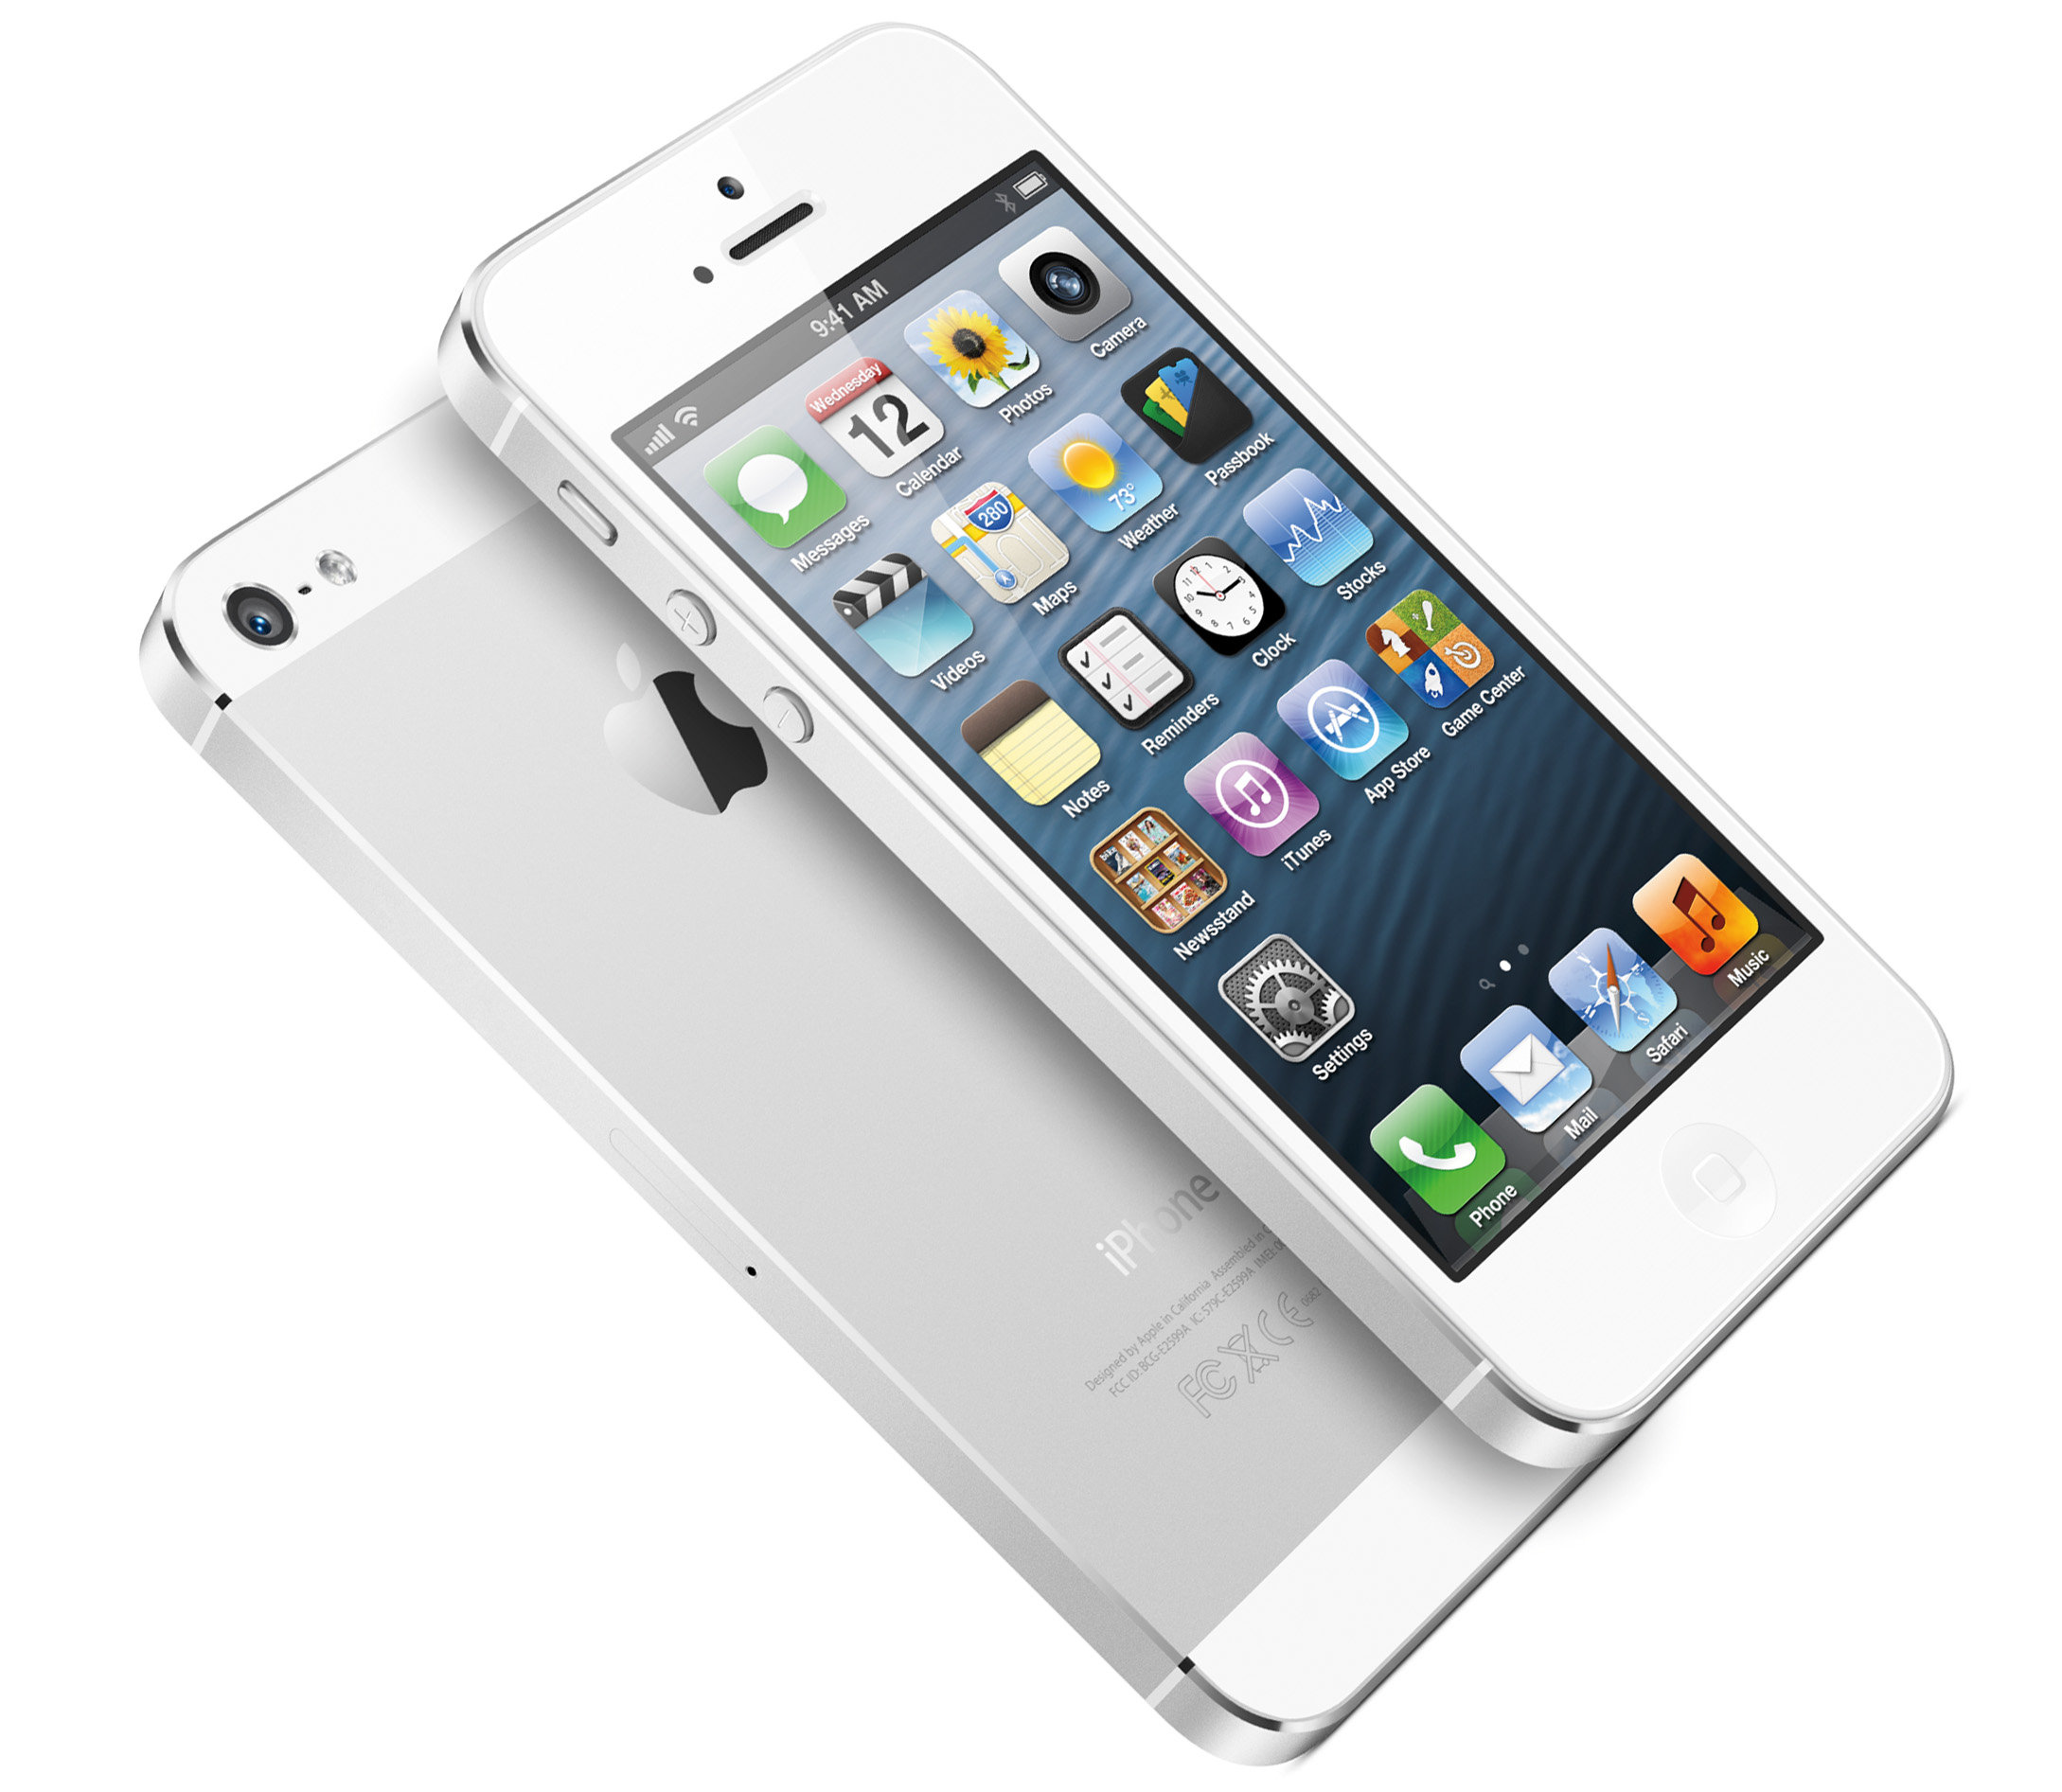 Initial Reports Wrong – China loves iPhone 5!